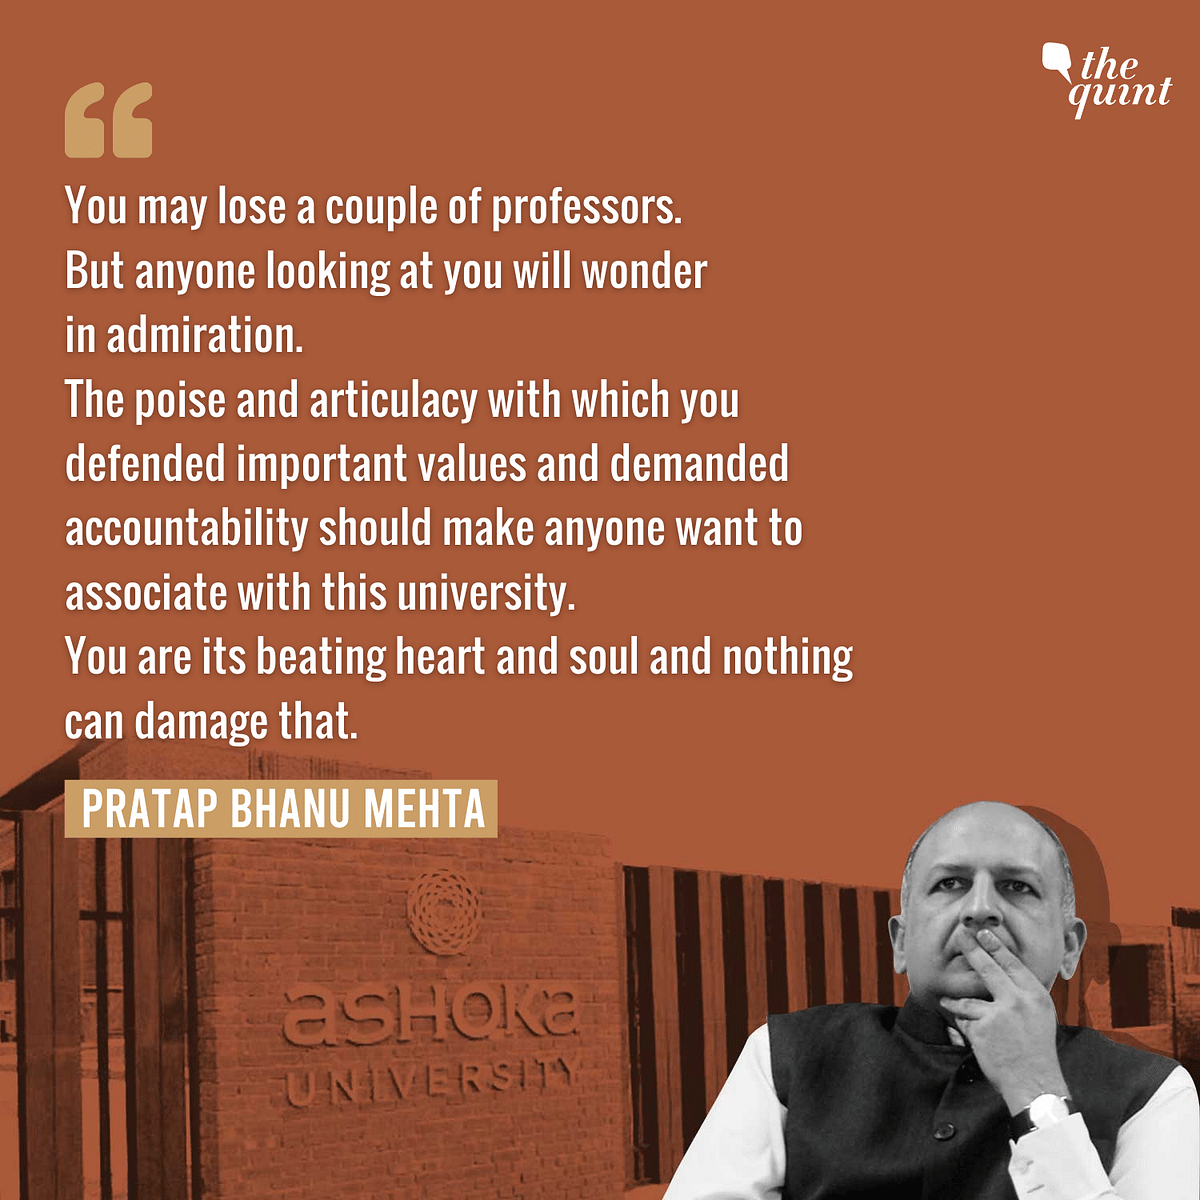 After his sudden departure, PB Mehta penned an emotional letter to his students. Watch them read out his words.